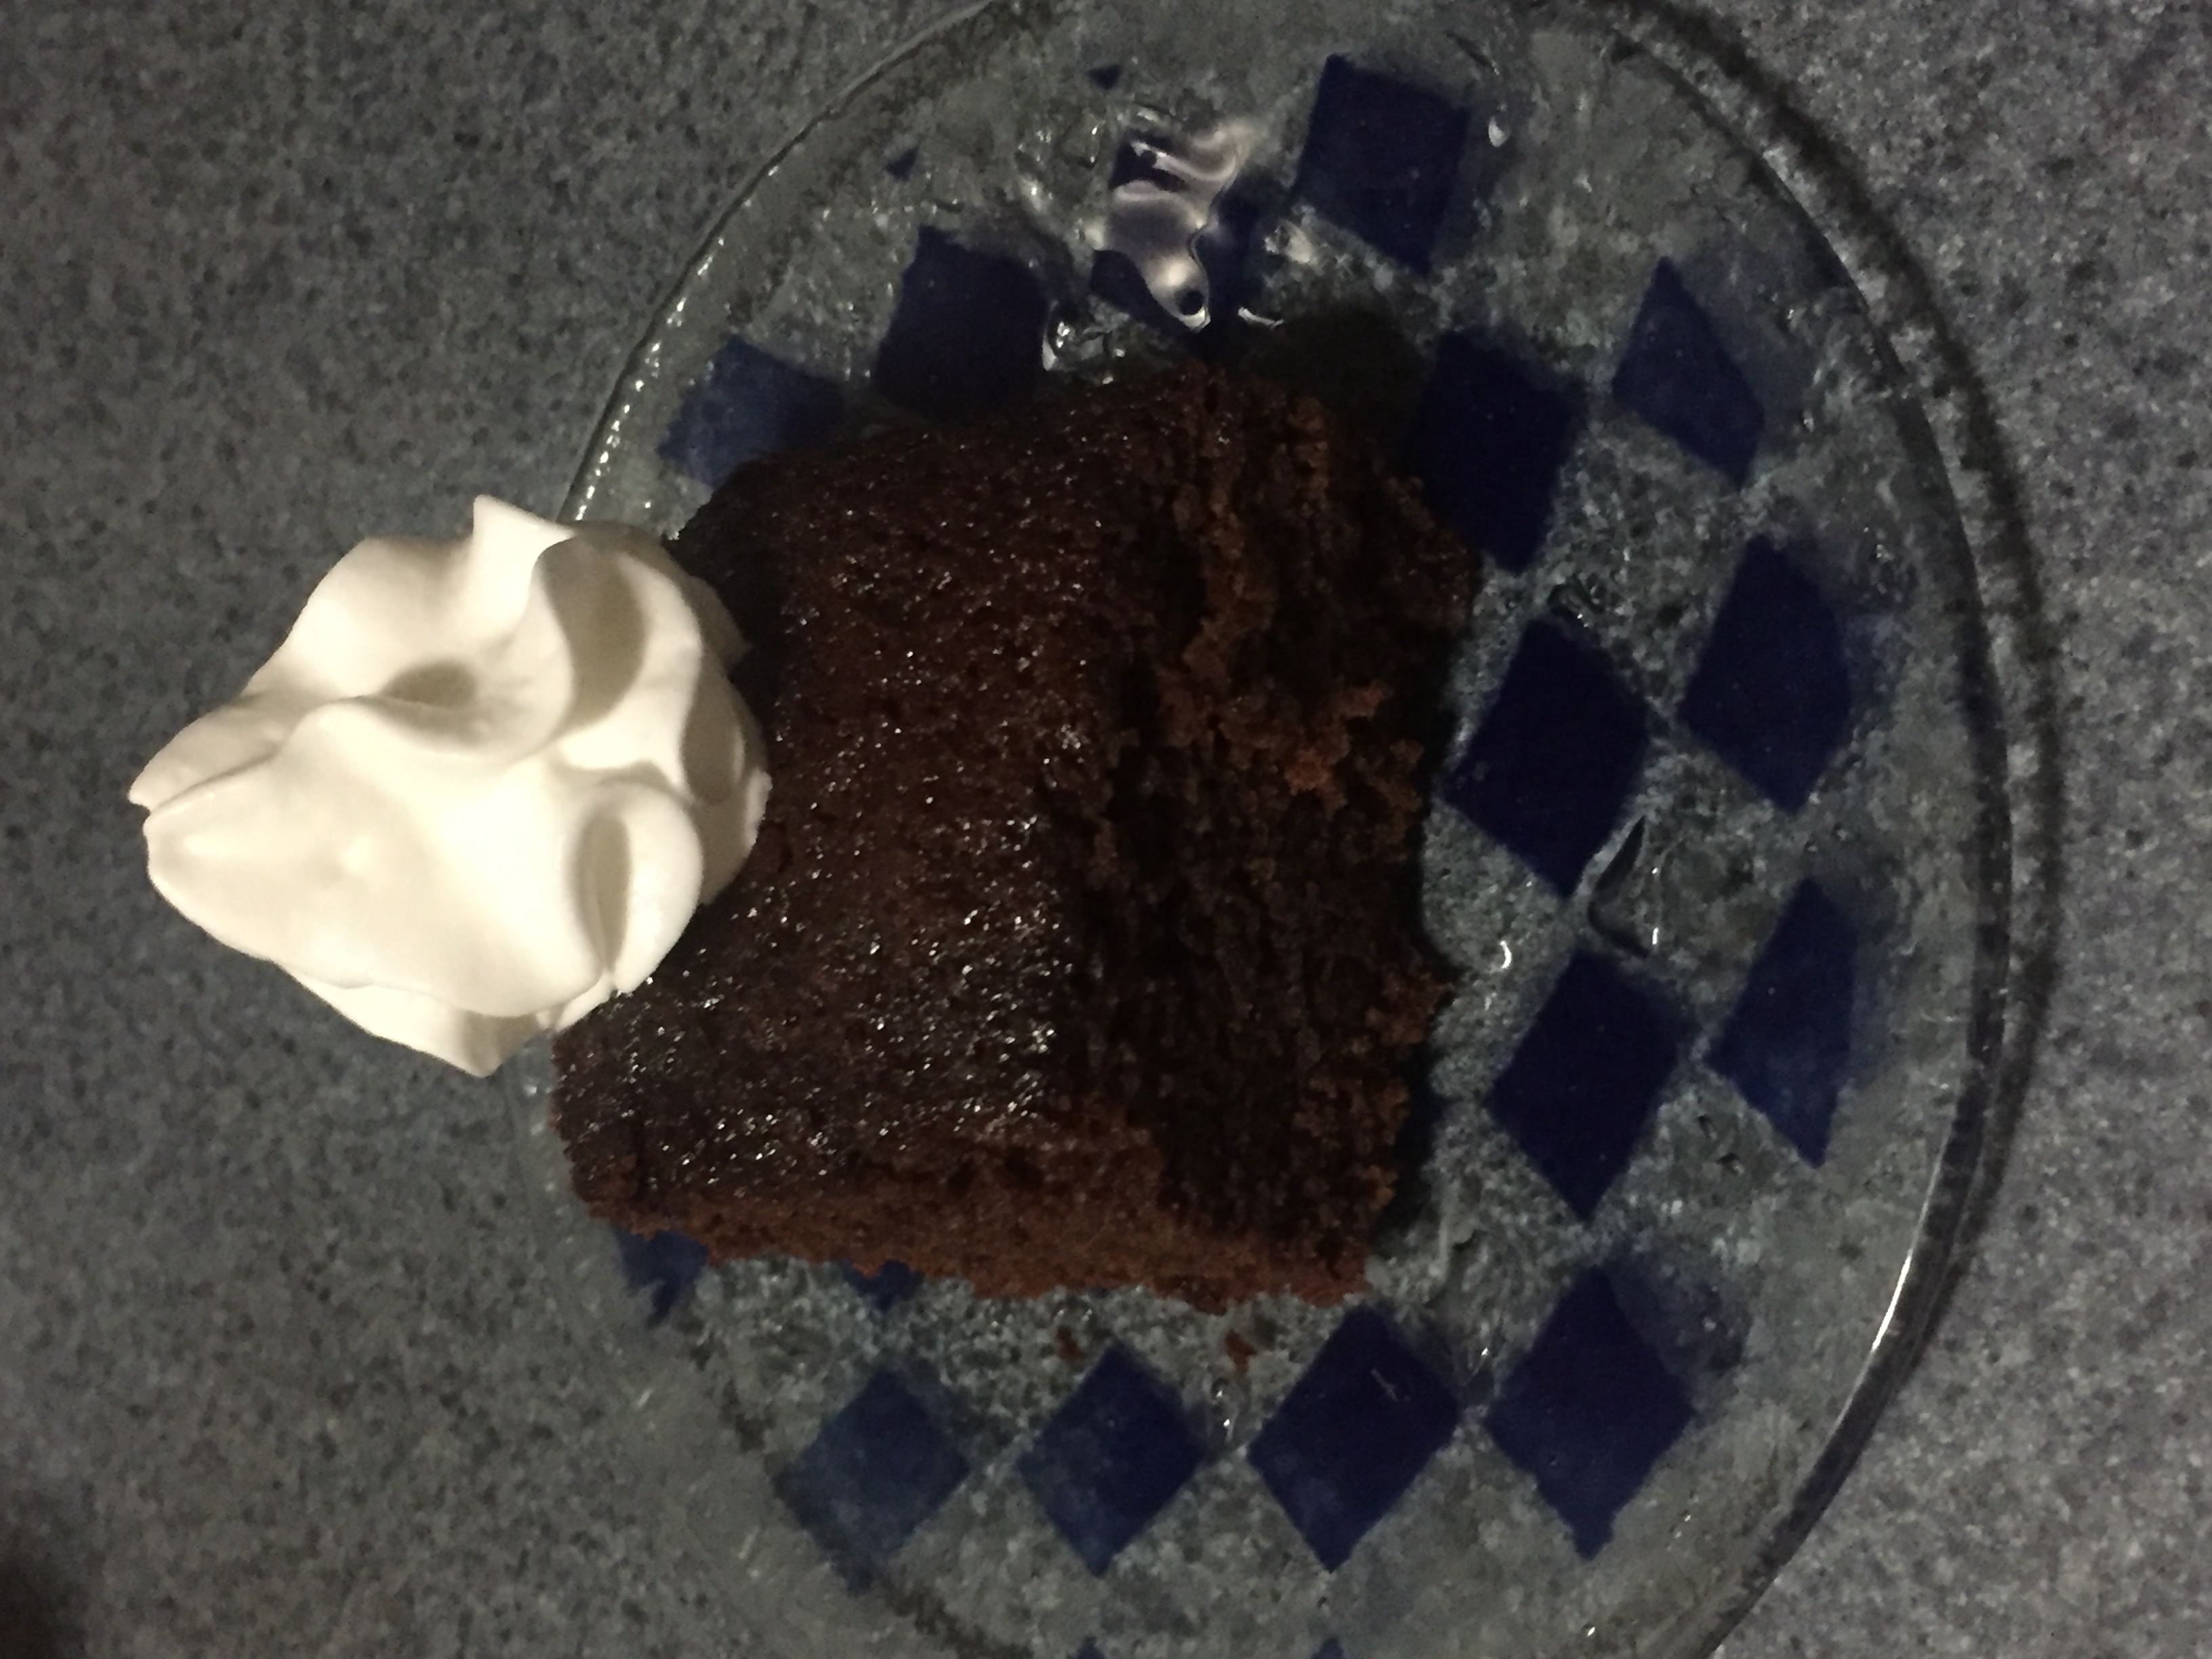 Square slice of a dark molasses cake with whipped cream on top set on a blue-checked glass dish.